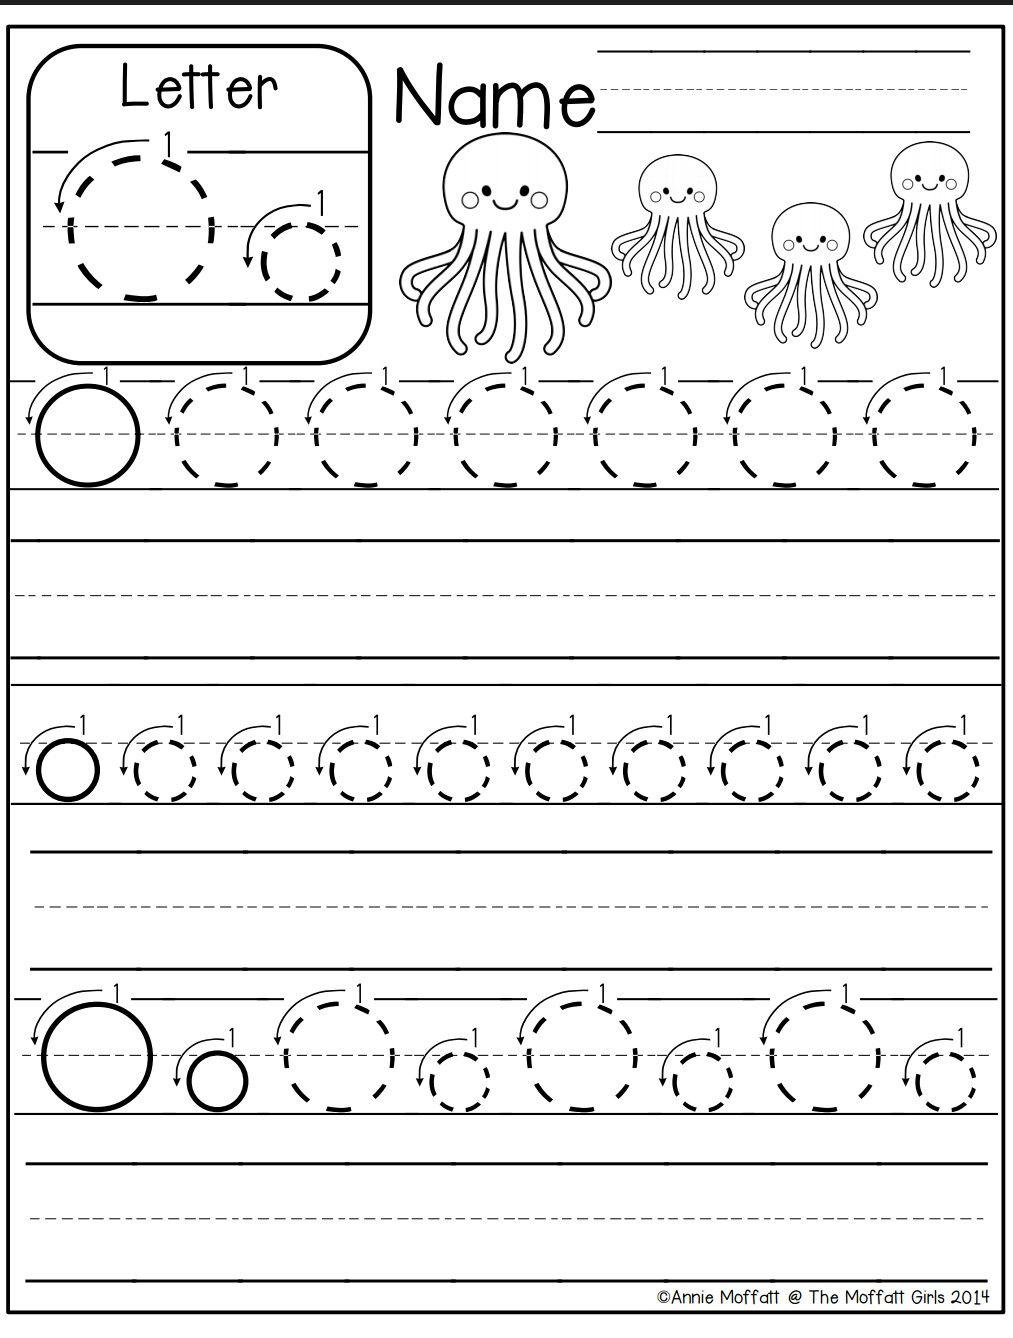 Letter O Tracing Sheet | Alphabetworksheetsfree inside Letter 0 Tracing